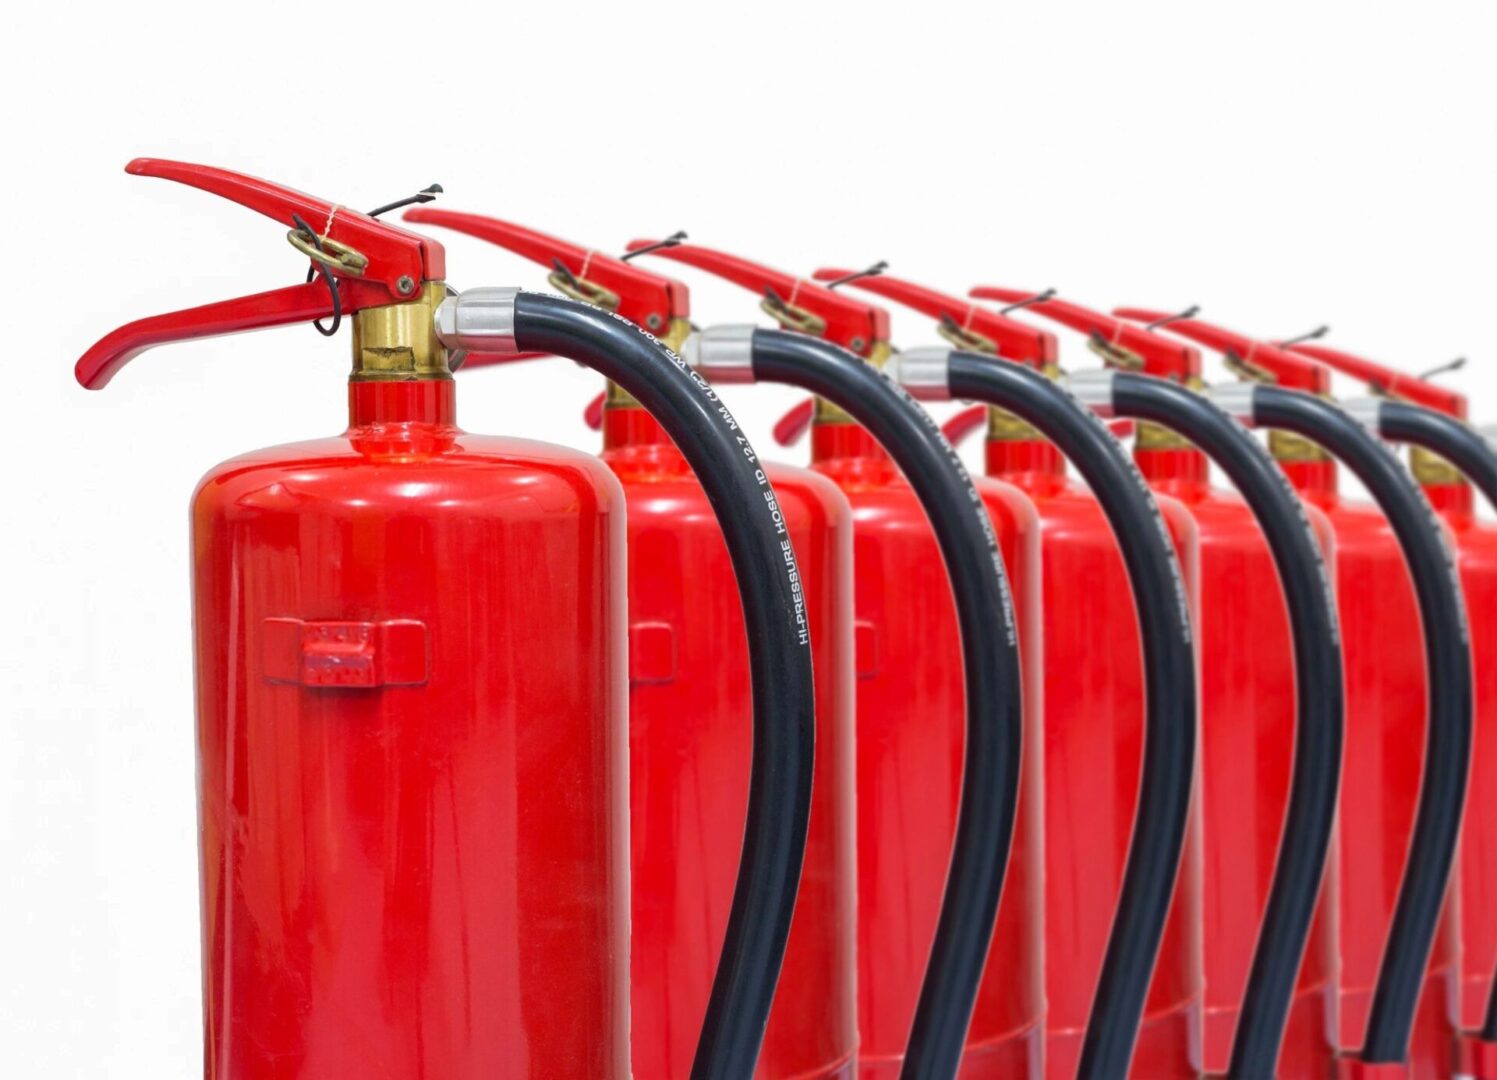 A row of red fire extinguishers with black hoses.